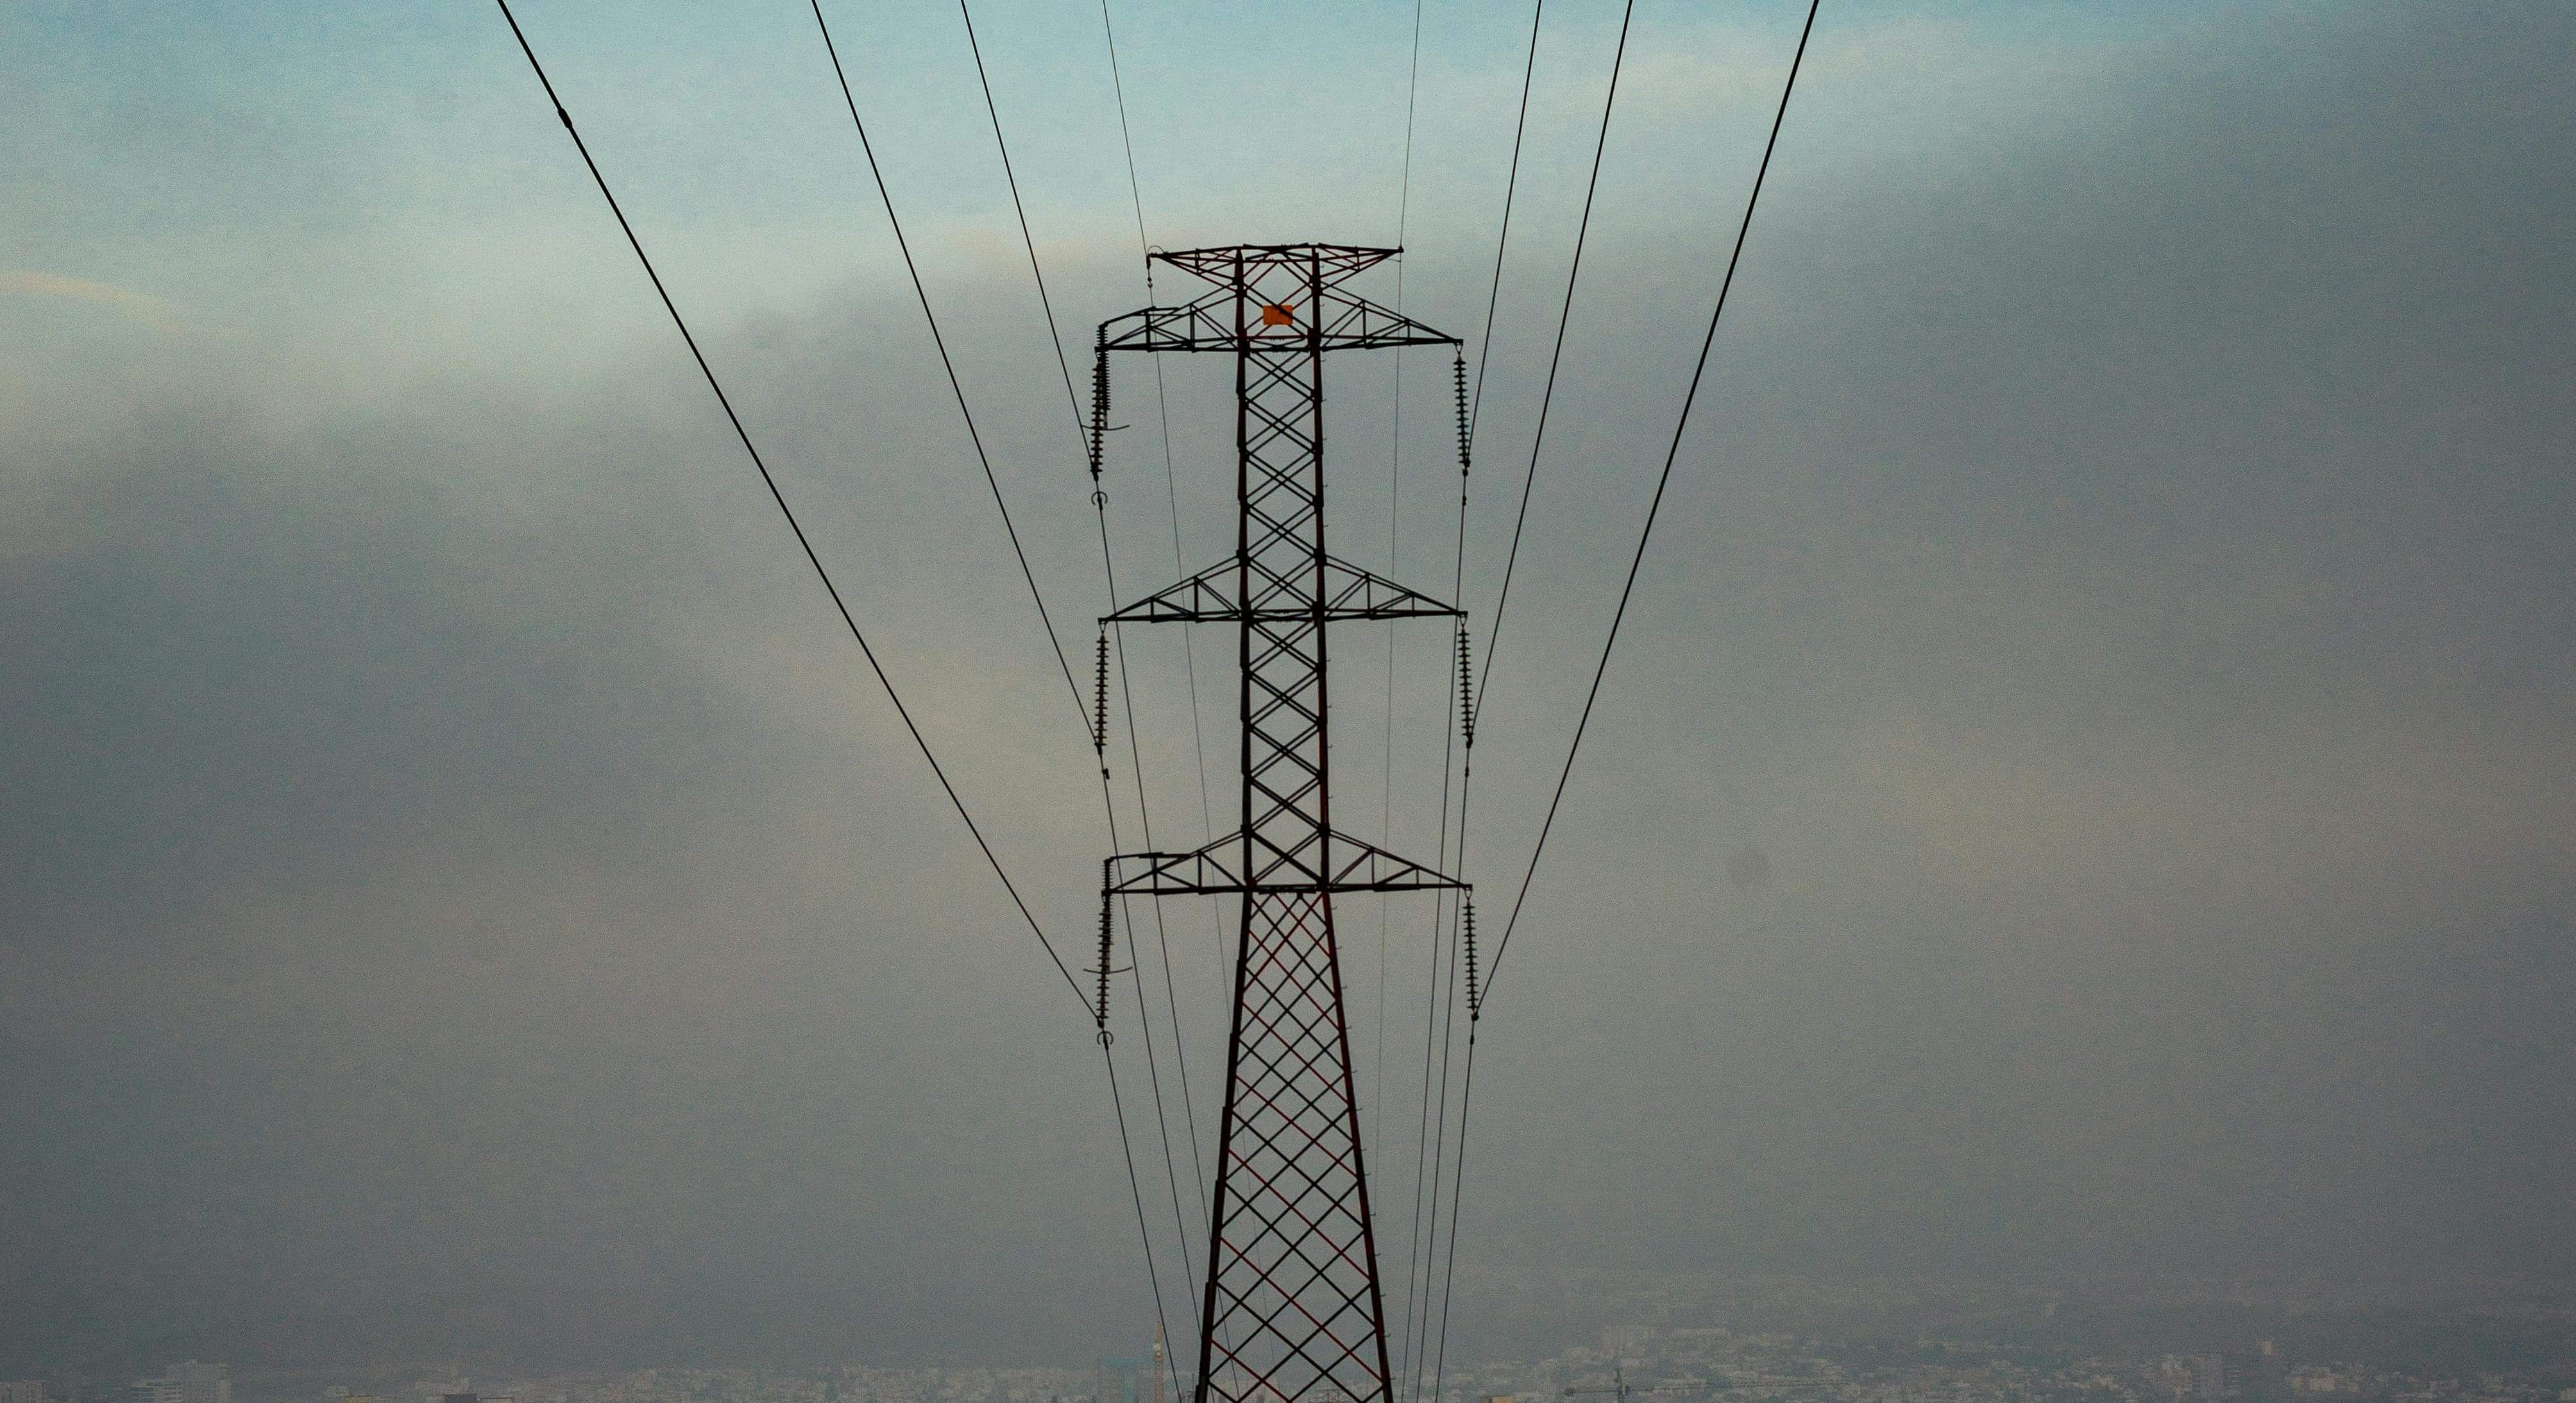 Power Grid Q4 results in line with expectations